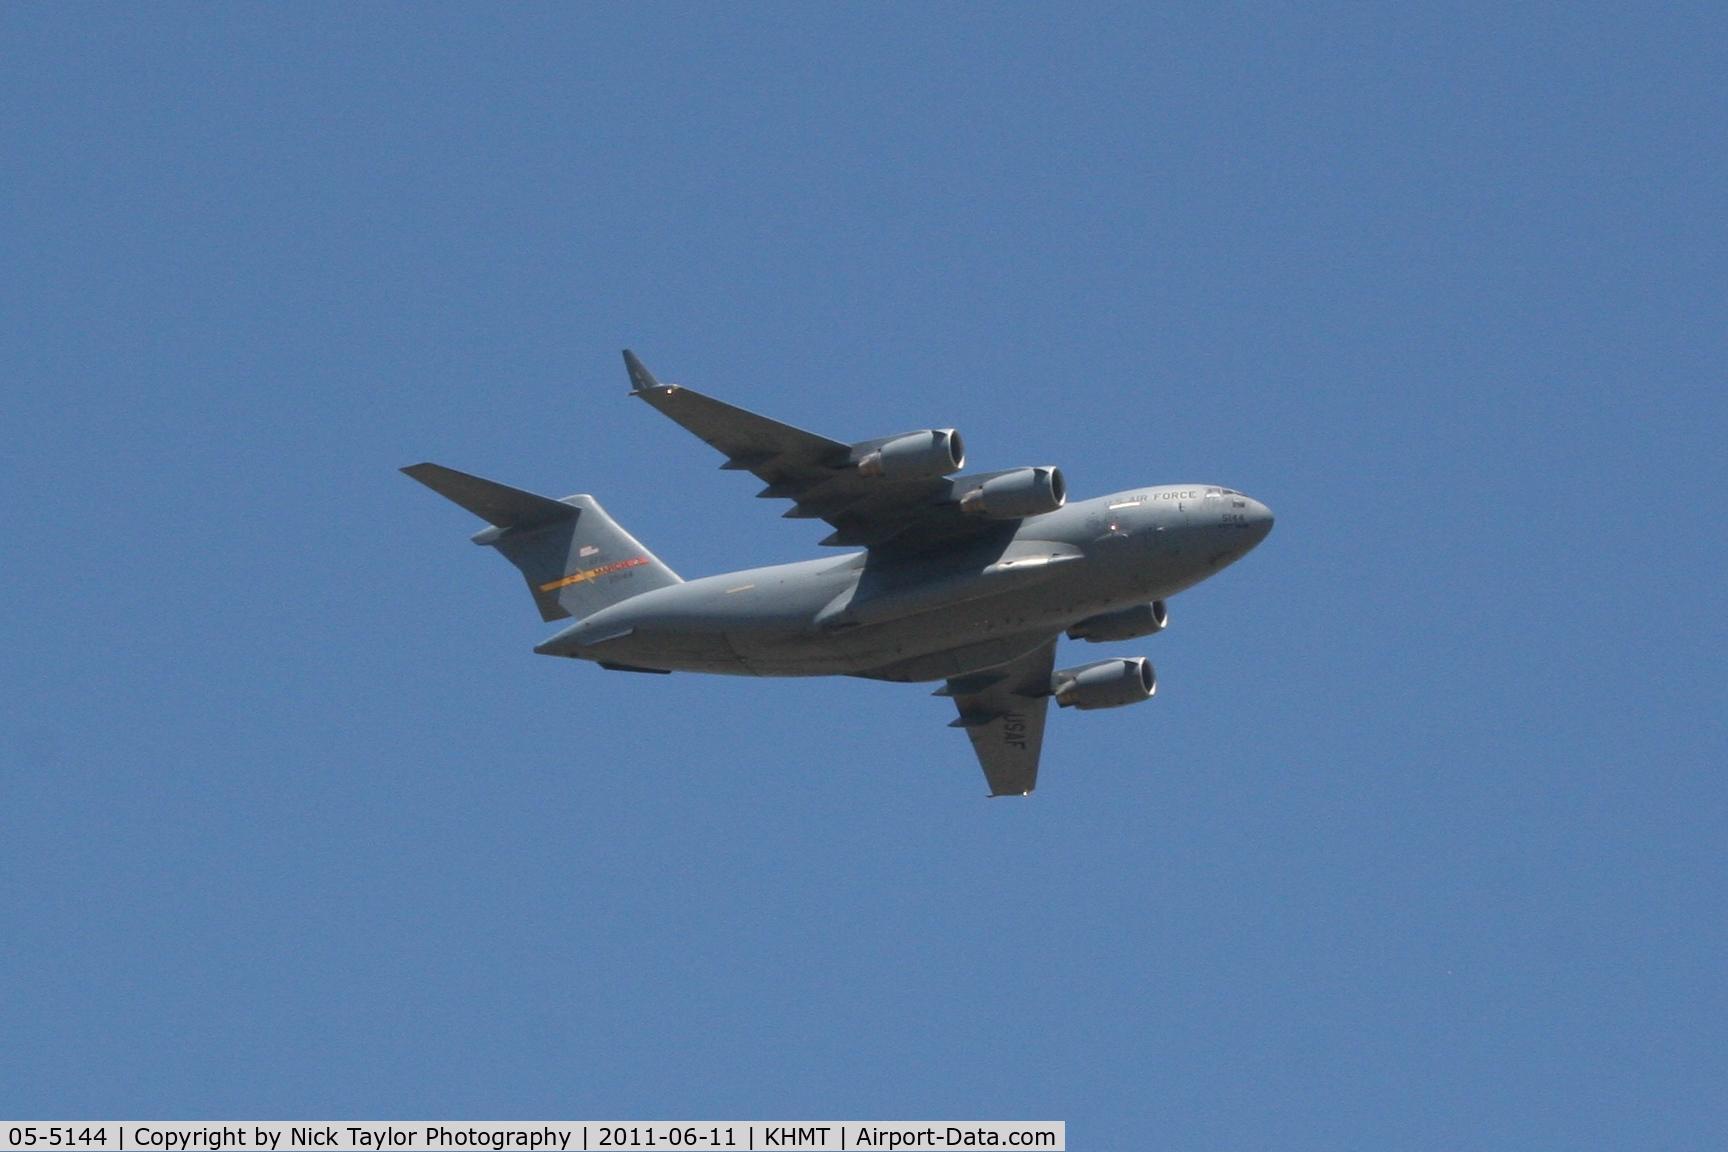 05-5144, 2005 Boeing C-17A Globemaster III C/N P-144, C-17 from March AFB passes through Hemet during the airshow